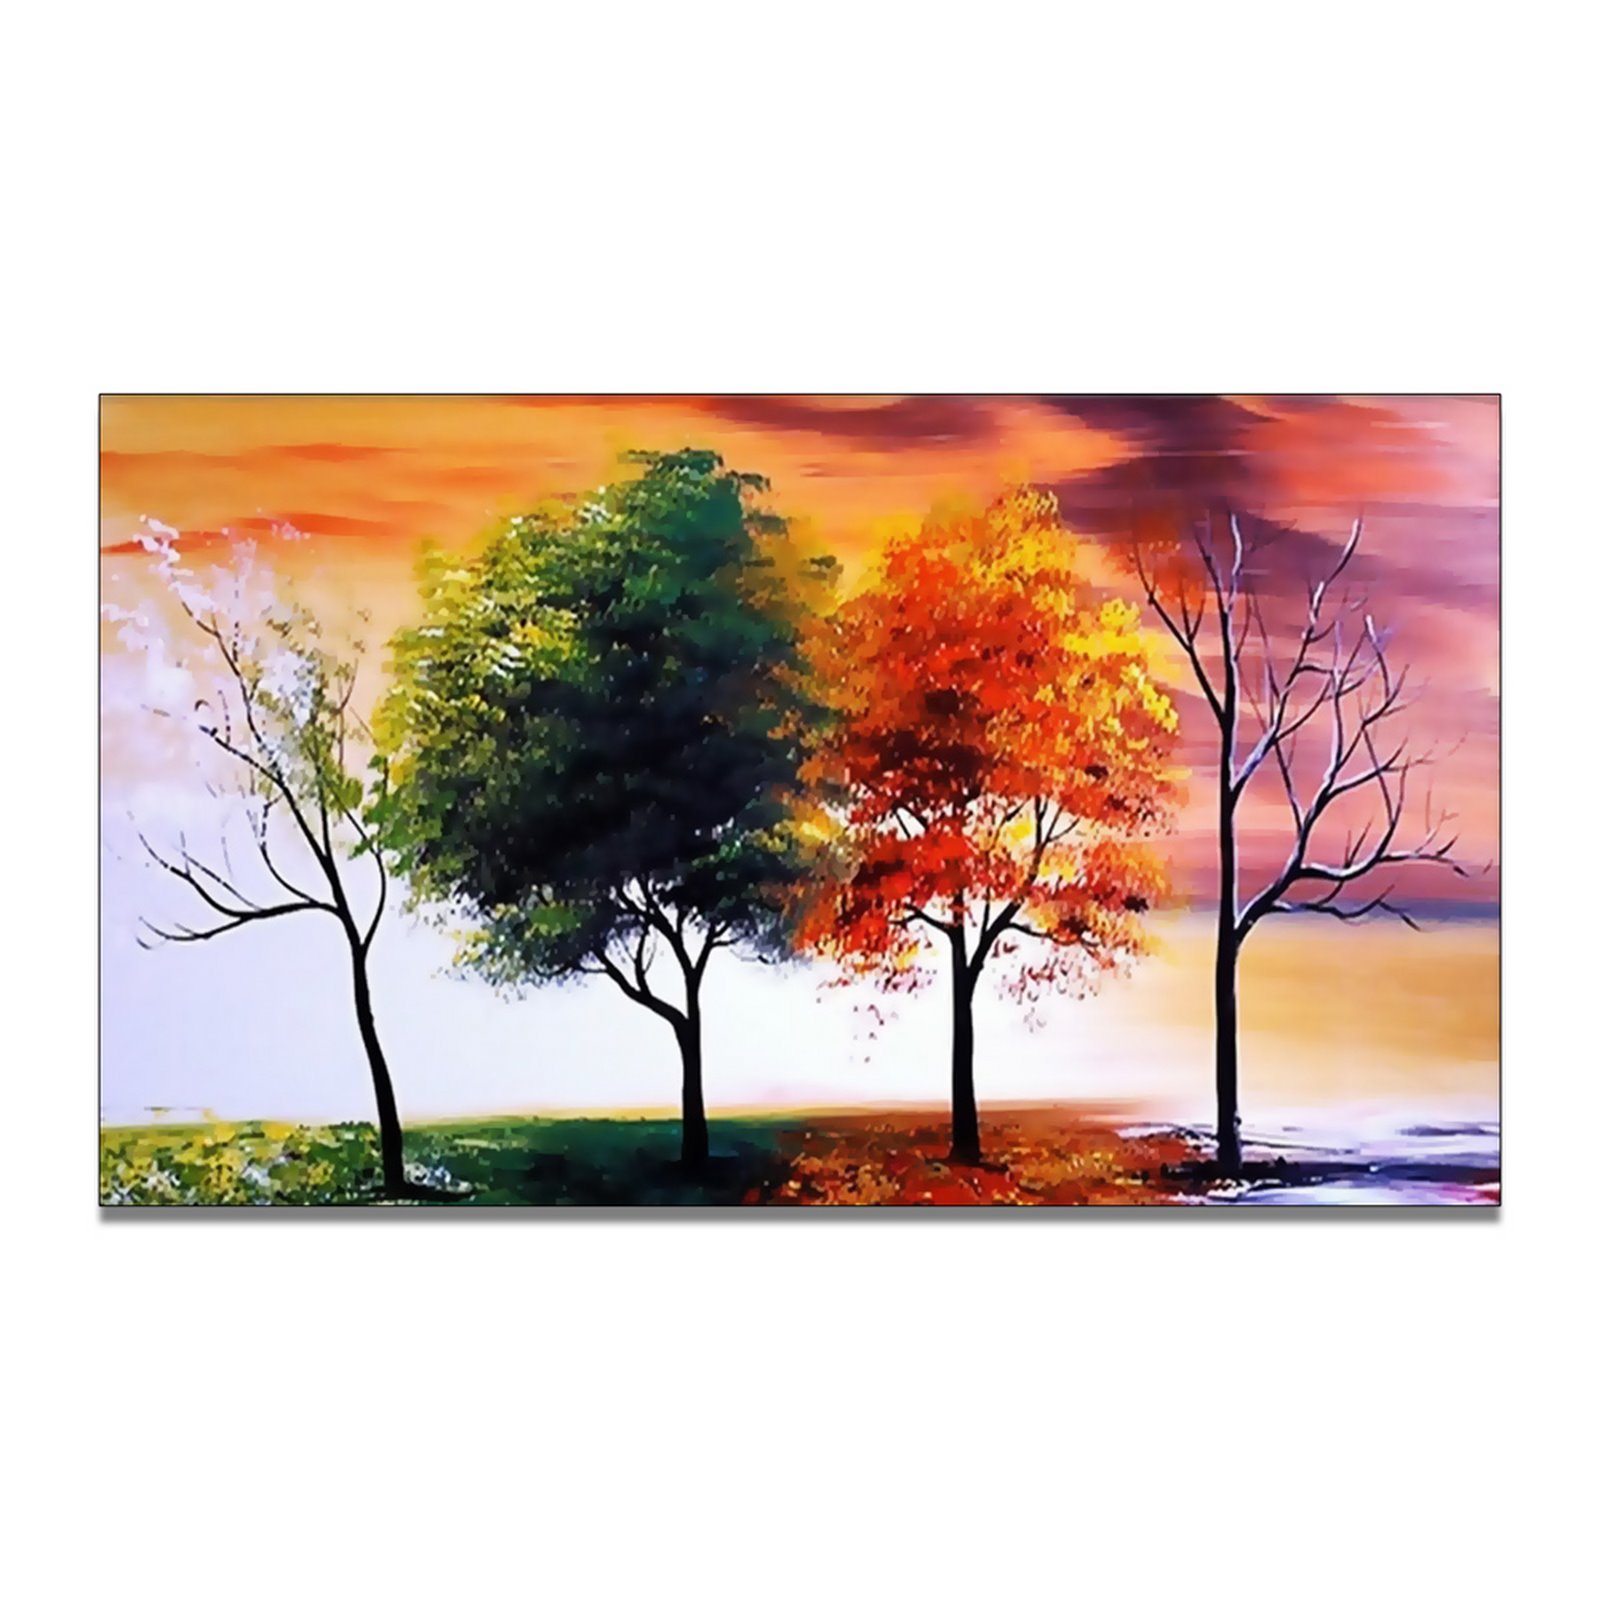 Four Seasons Nature Tree Painting - 32 x 16 in - Textured Hand-Painted Fine Art - Stretched on wooden bars - Wall kit included